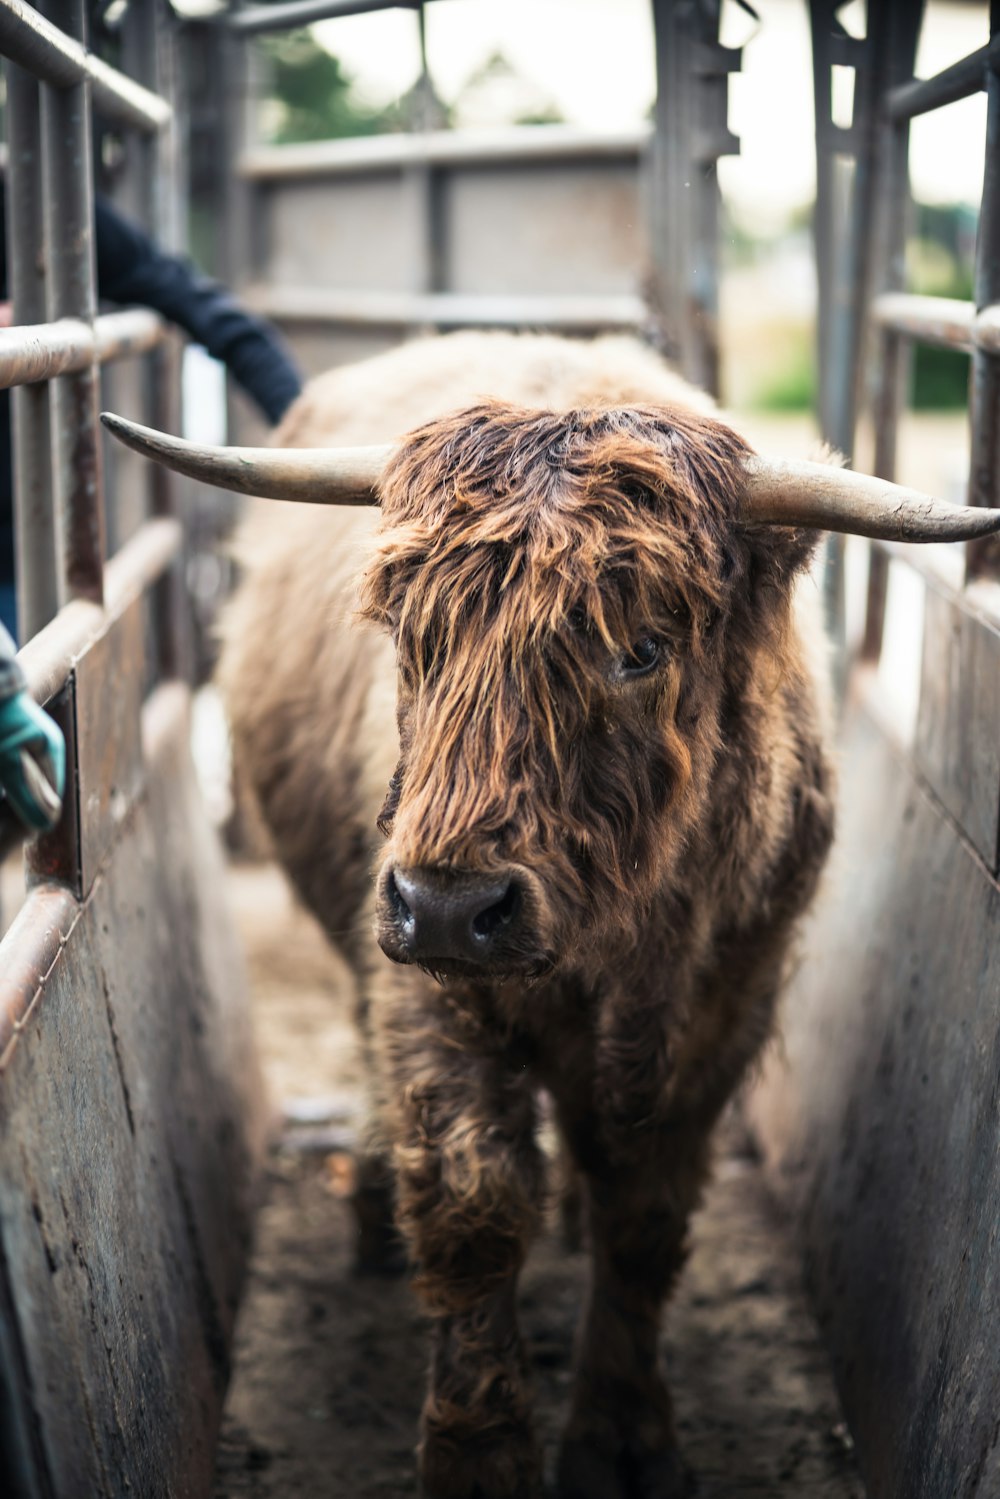 a brown cow standing inside of a metal pen